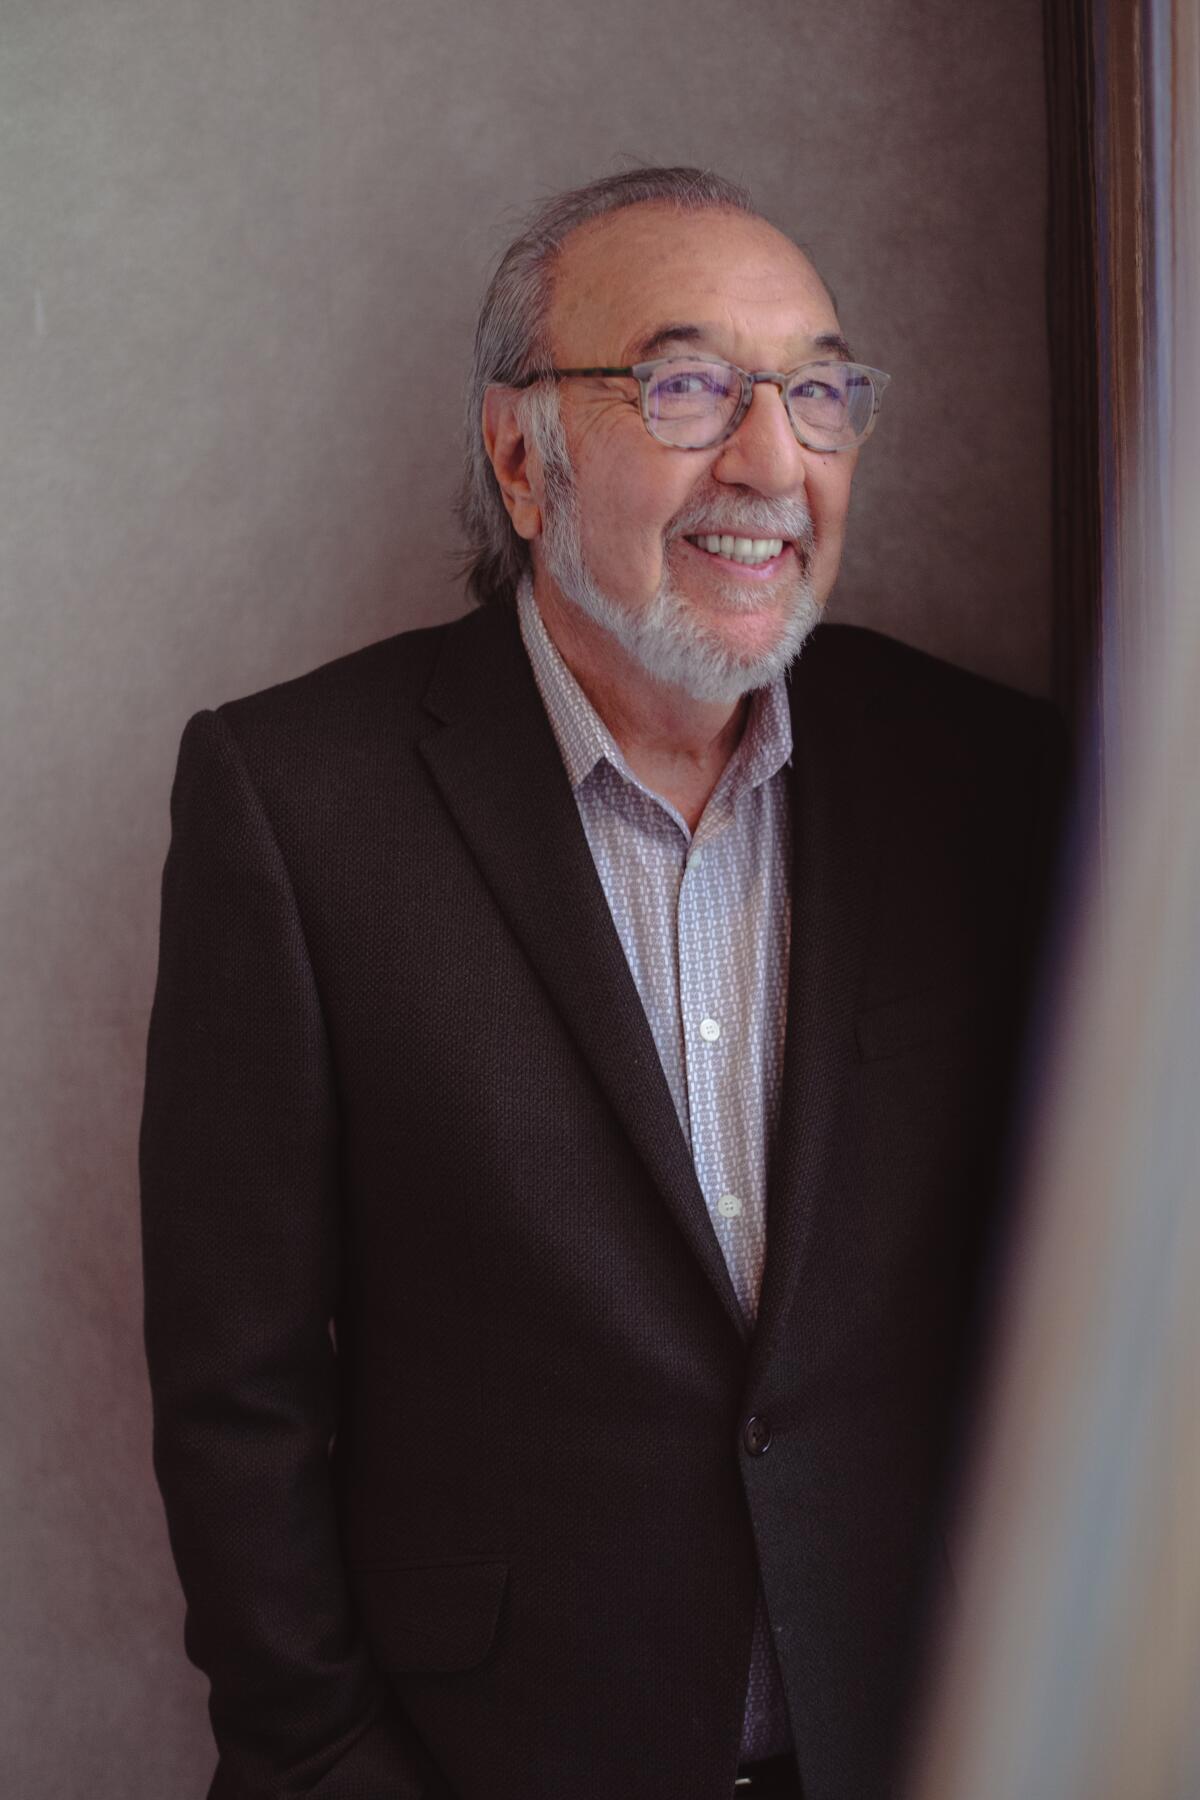 Man with a beard and glasses, dress shirt and jacket smiles and looks at camera with side-eye.